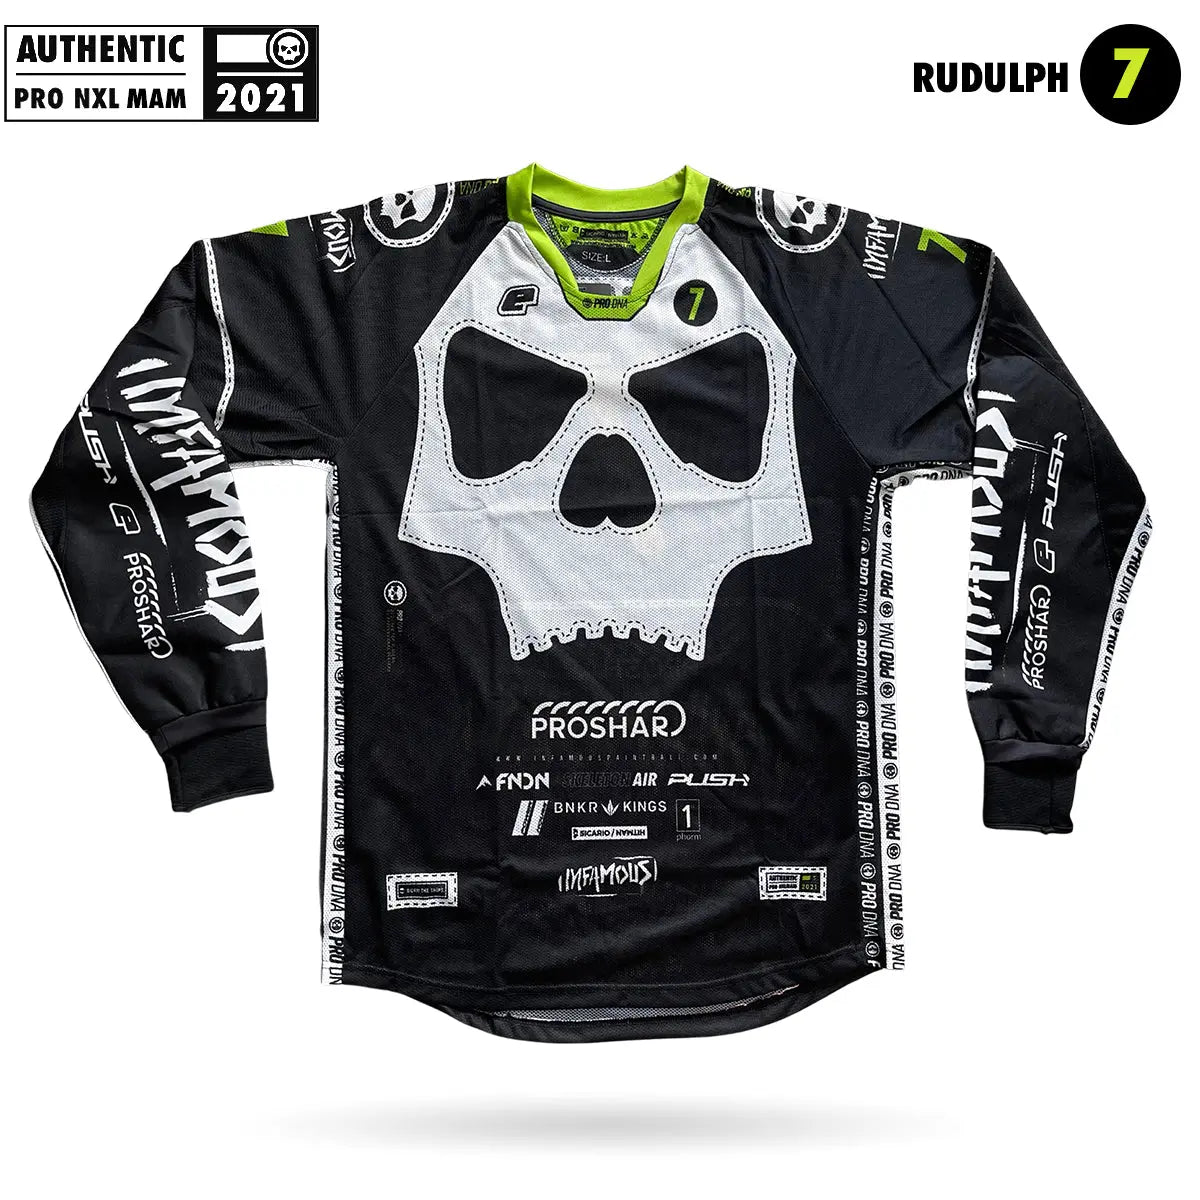 INFAMOUS HOME JERSEY - NXL MAM 2021 - RUDULPH Infamous Paintball